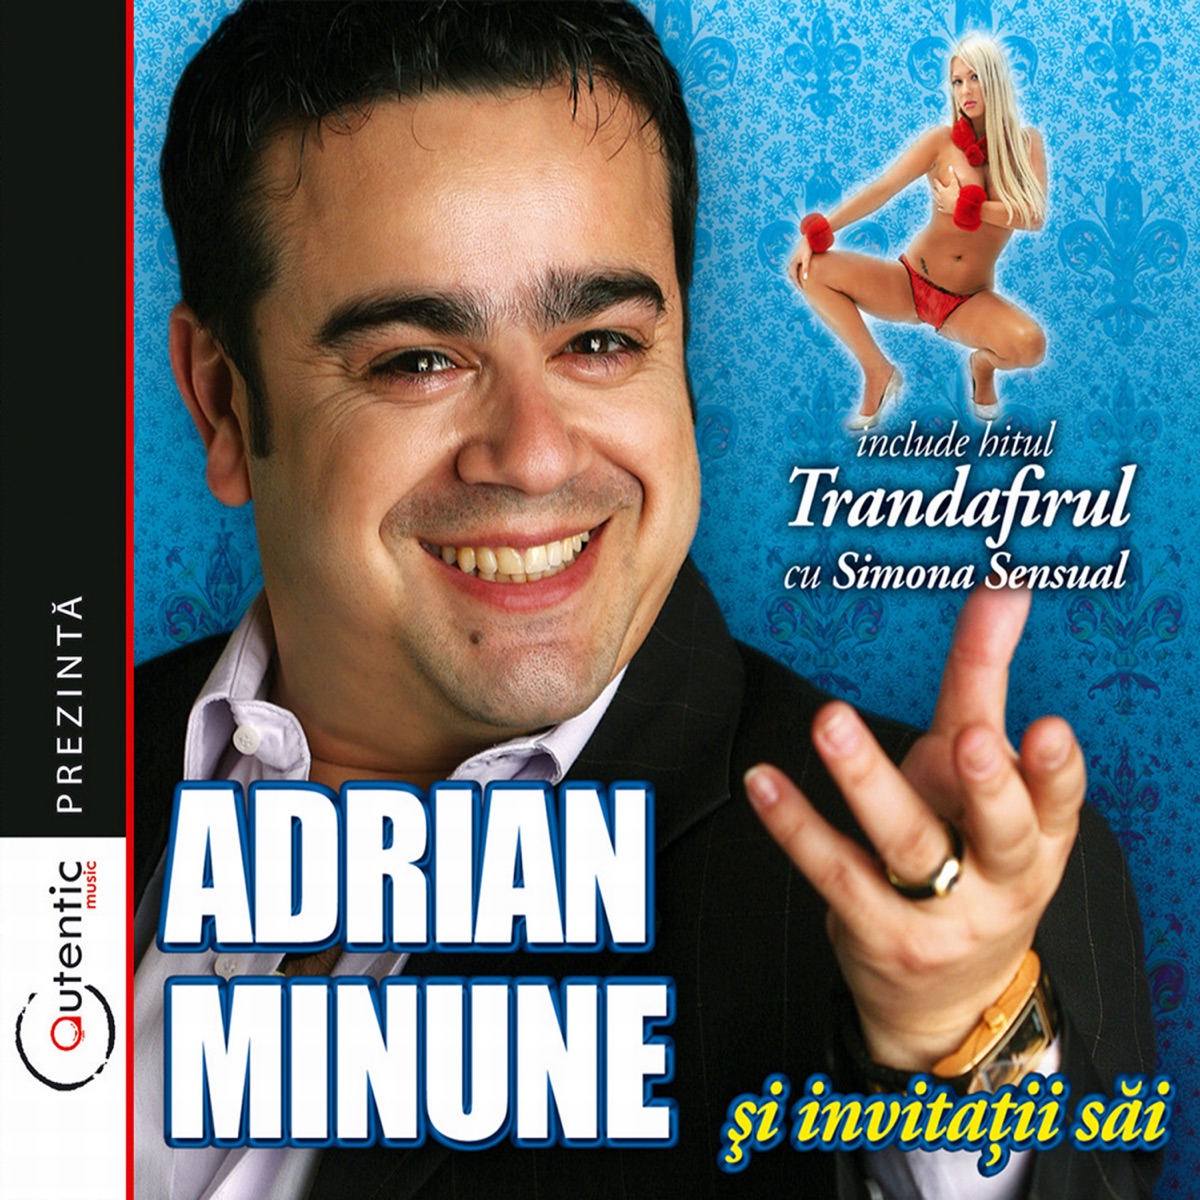 Best Of by Adrian Minune on Apple Music